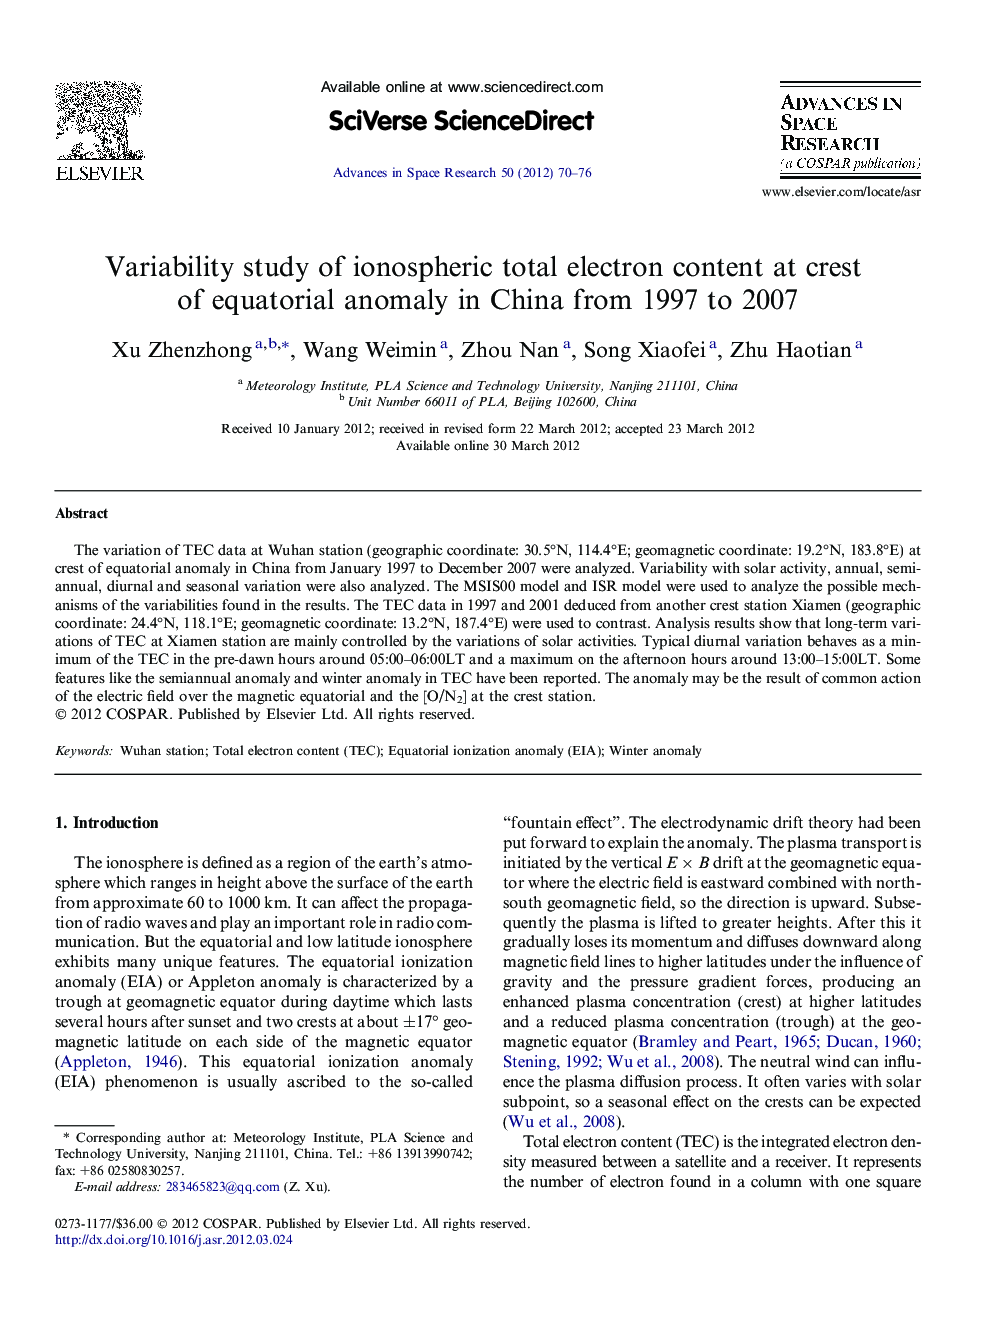 Variability study of ionospheric total electron content at crest of equatorial anomaly in China from 1997 to 2007